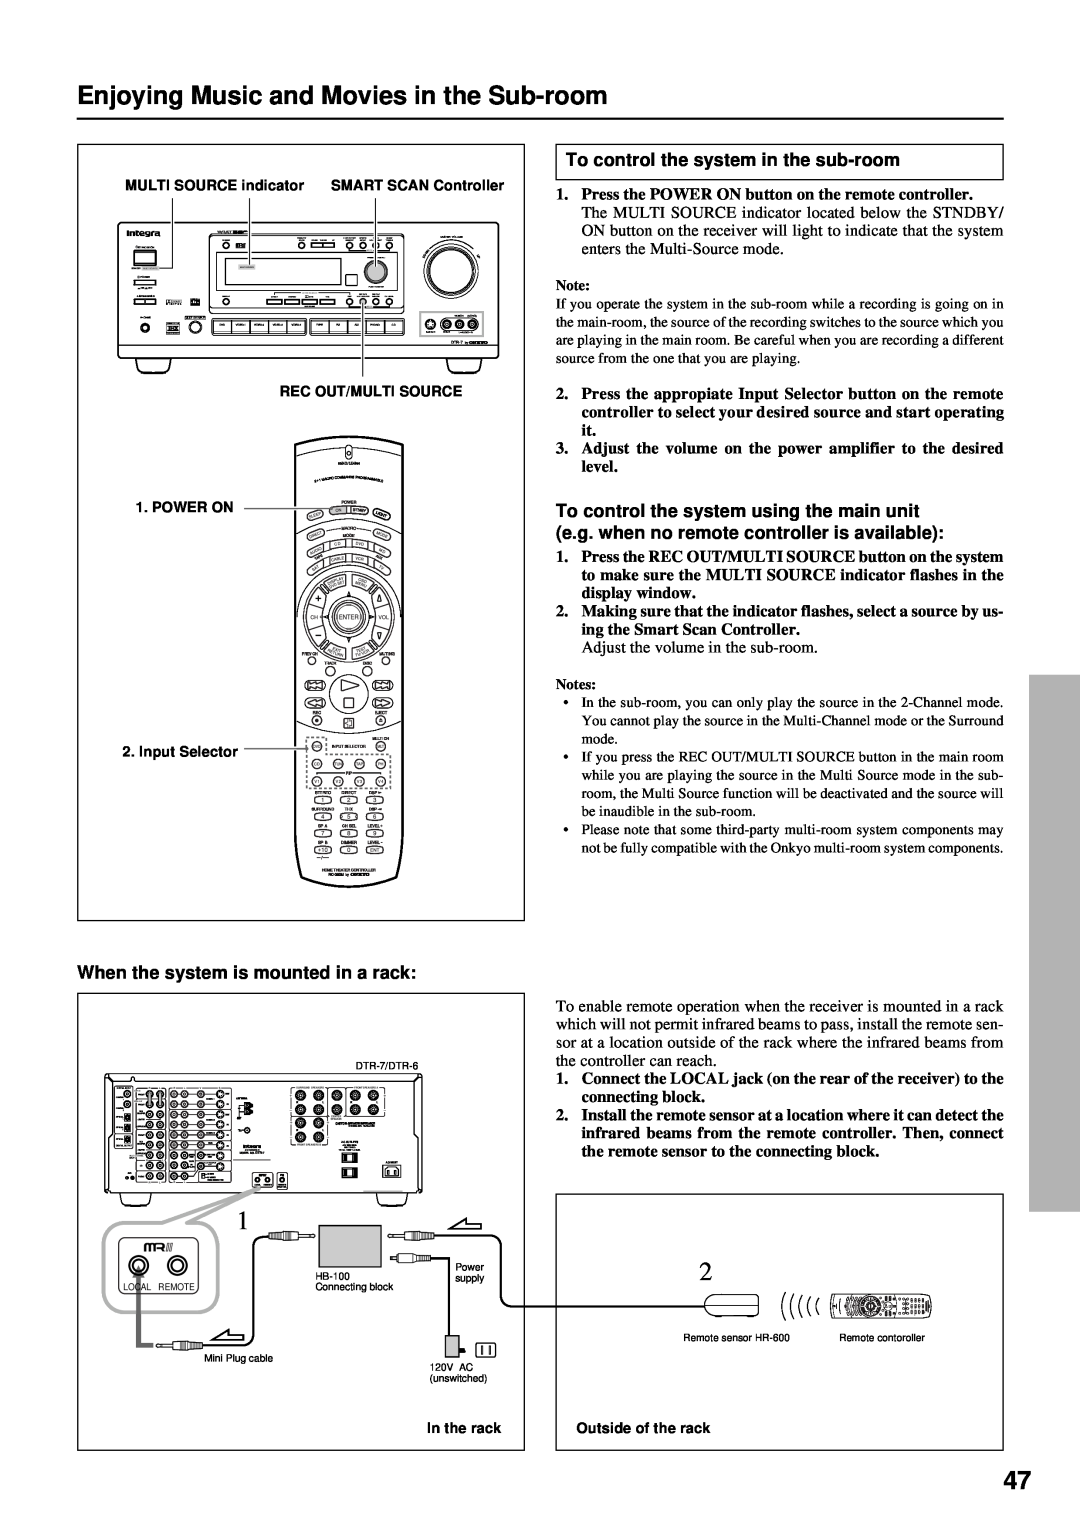 Integra DTR-7 instruction manual Enjoying Music and Movies in the Sub-room, To control the system in the sub-room 